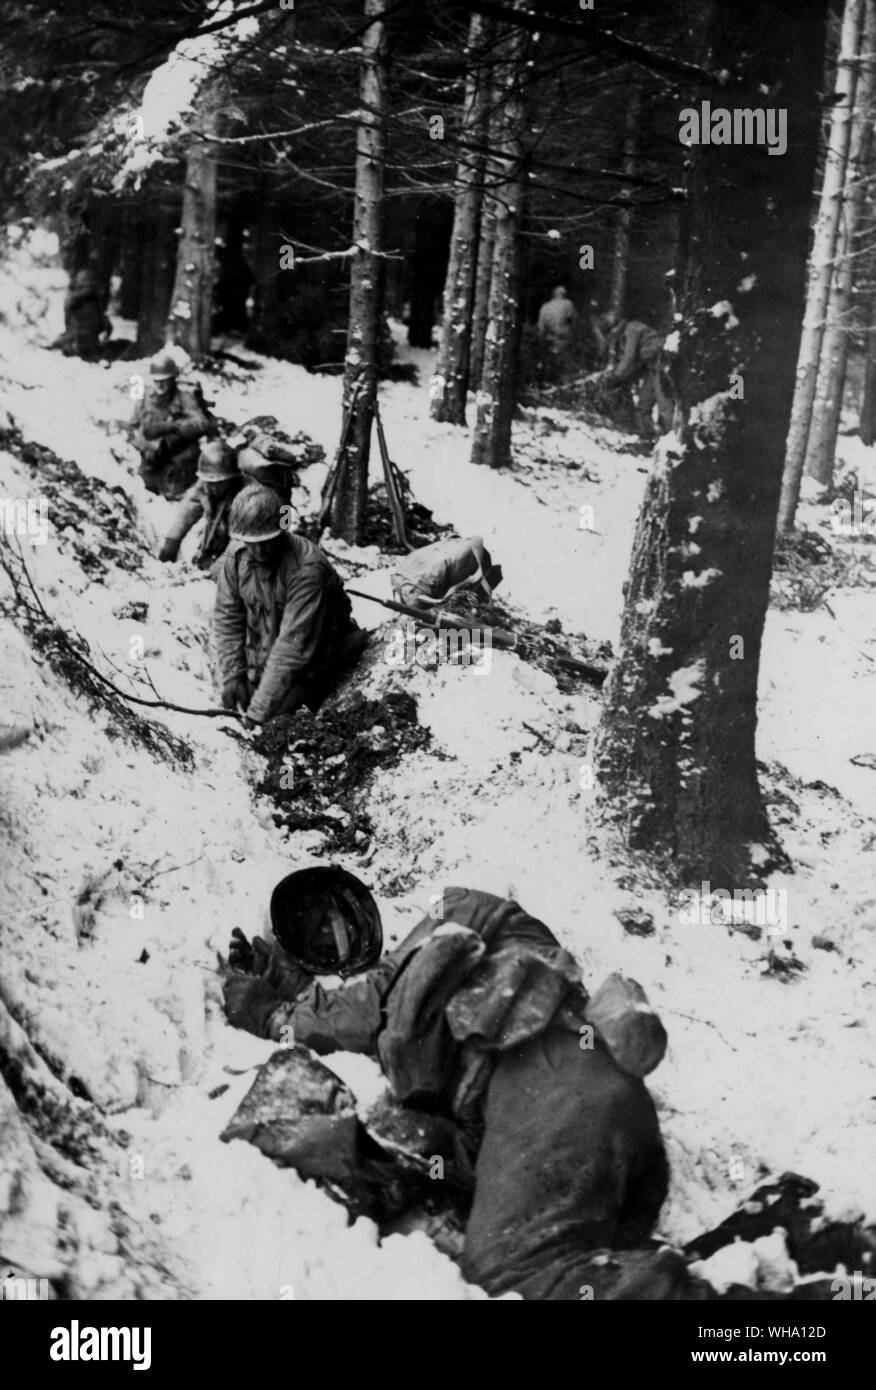 WW2: American soldiers dig hasty foxholes in snow-covered terrain as enemy artillery fire opens up near Berismenil, Belgium. Soldier lying in foreground has been stricken down. Ardennes campaign, Dec. 1944. Stock Photo